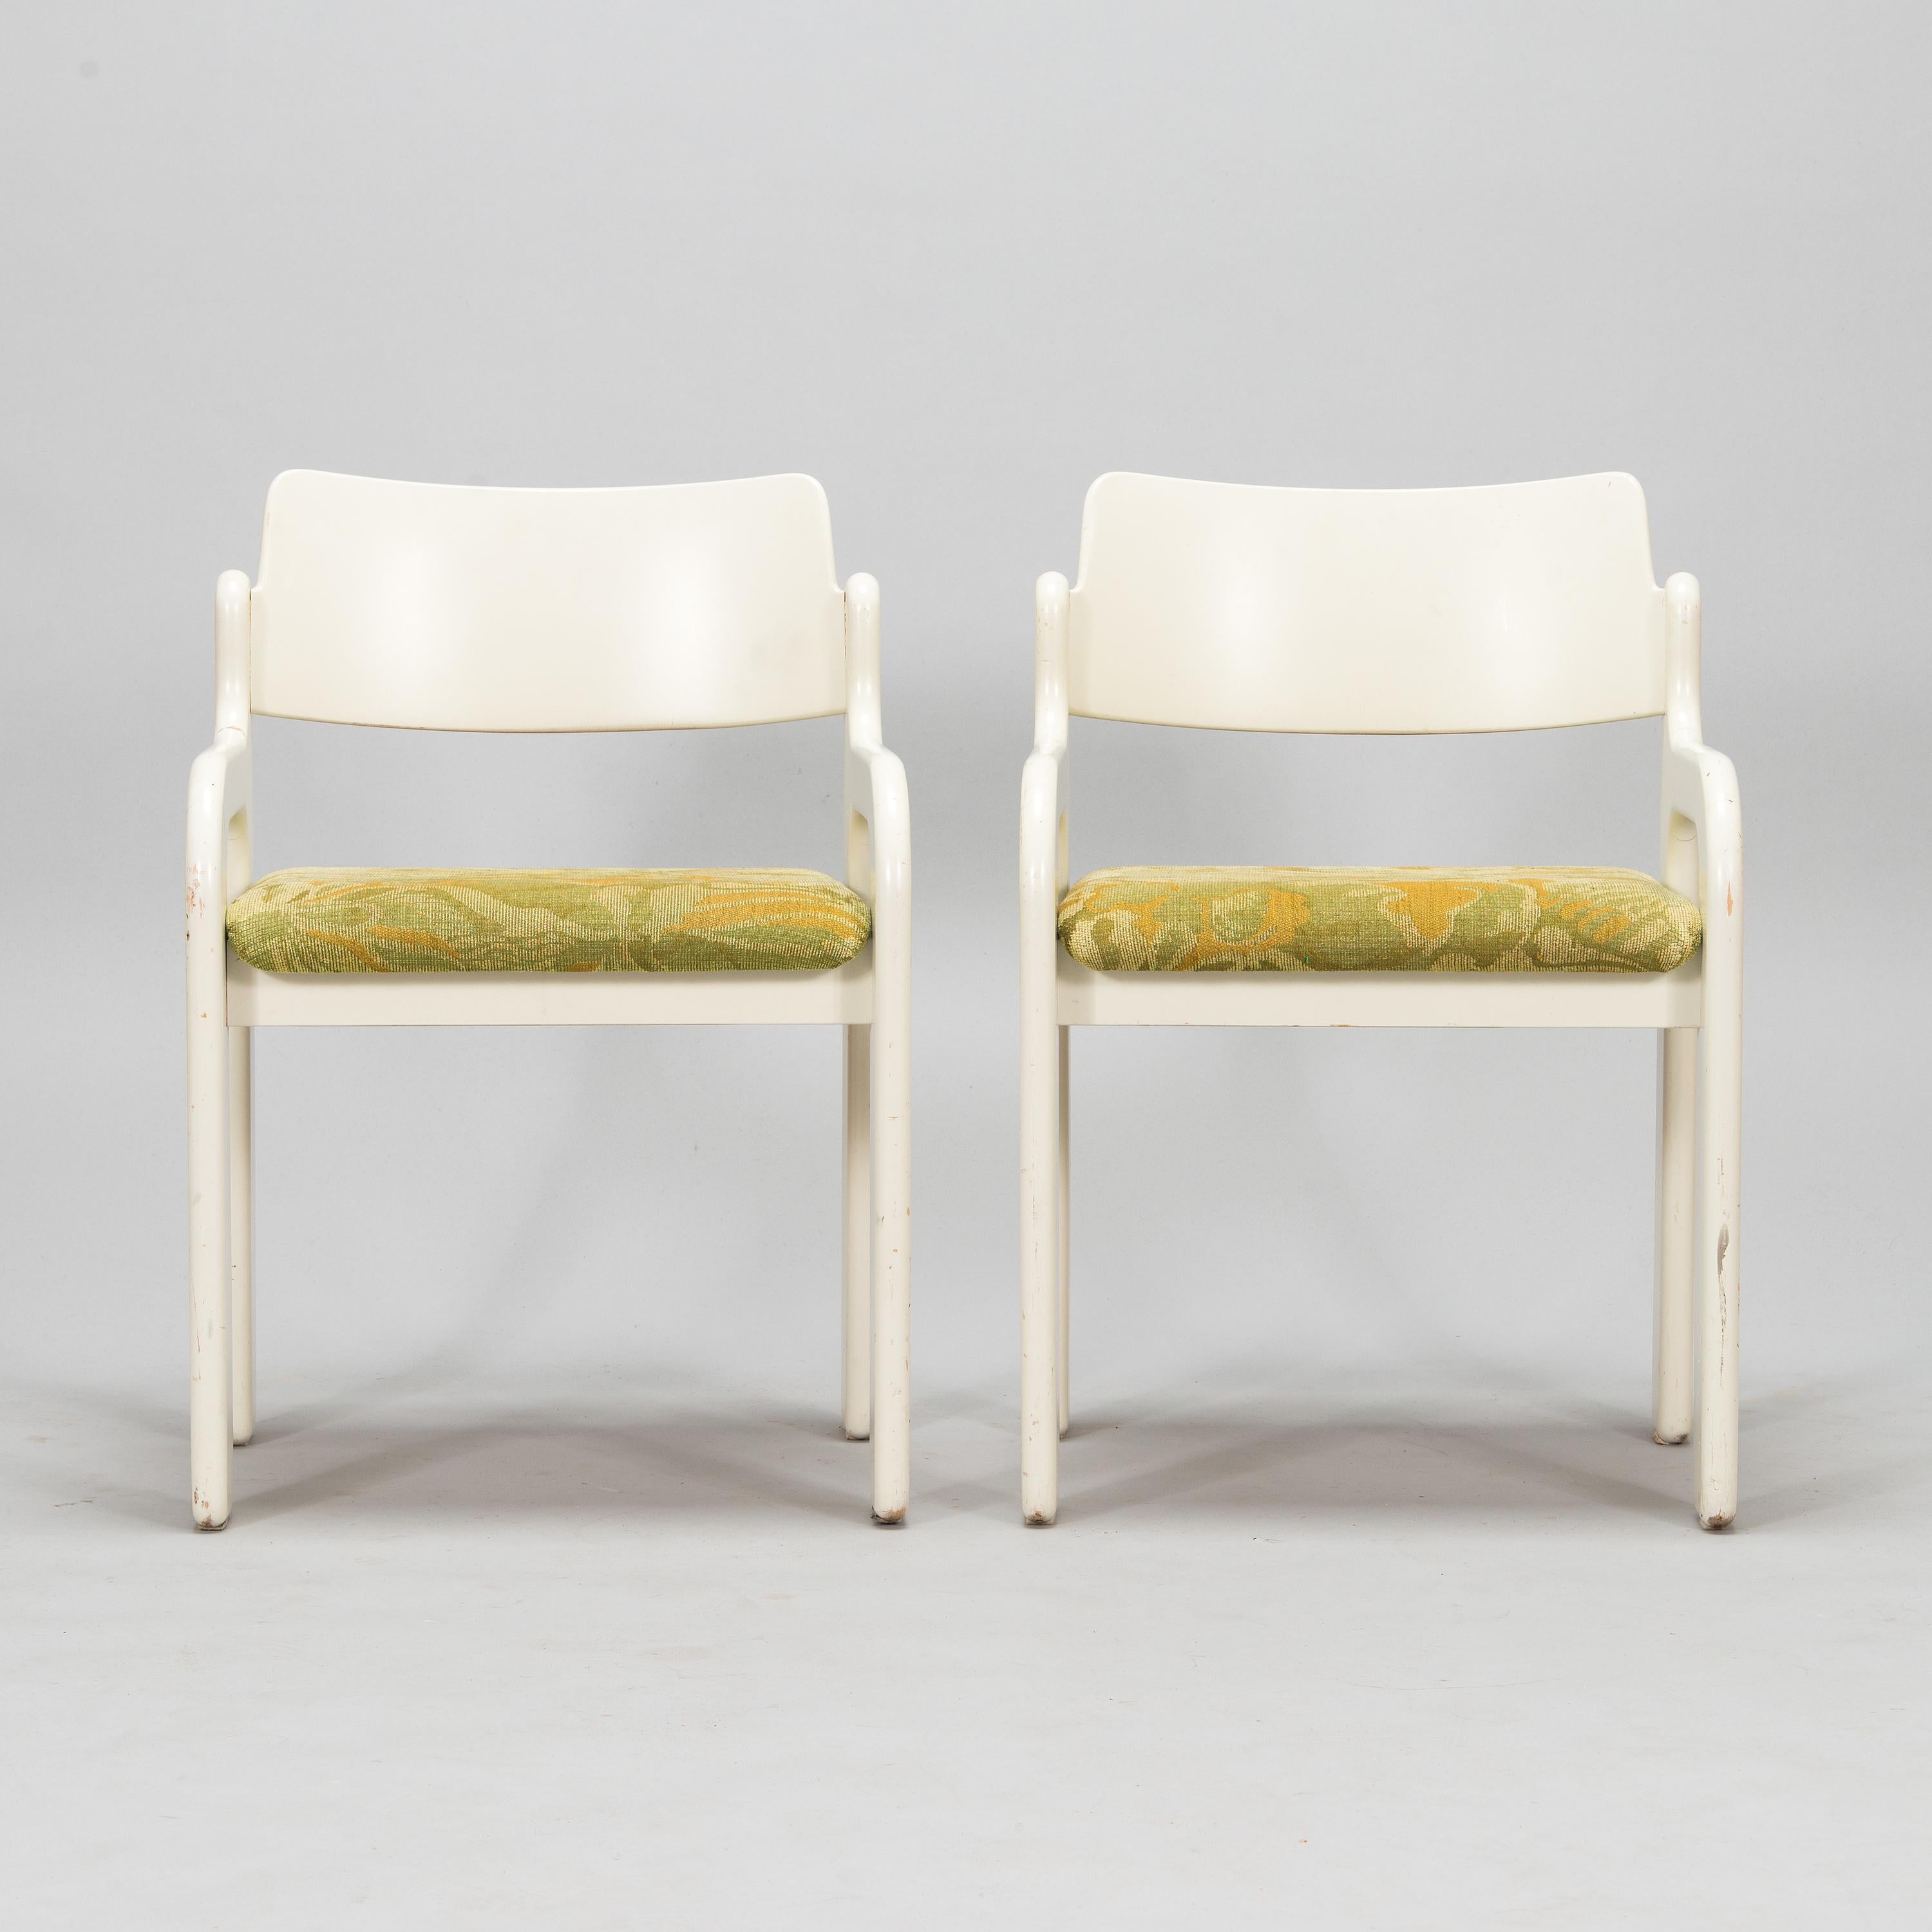 Eero Aarnio 4 Chairs Model Flamingo for Asko Finland Marked, 1970s In Fair Condition For Sale In Paris, FR